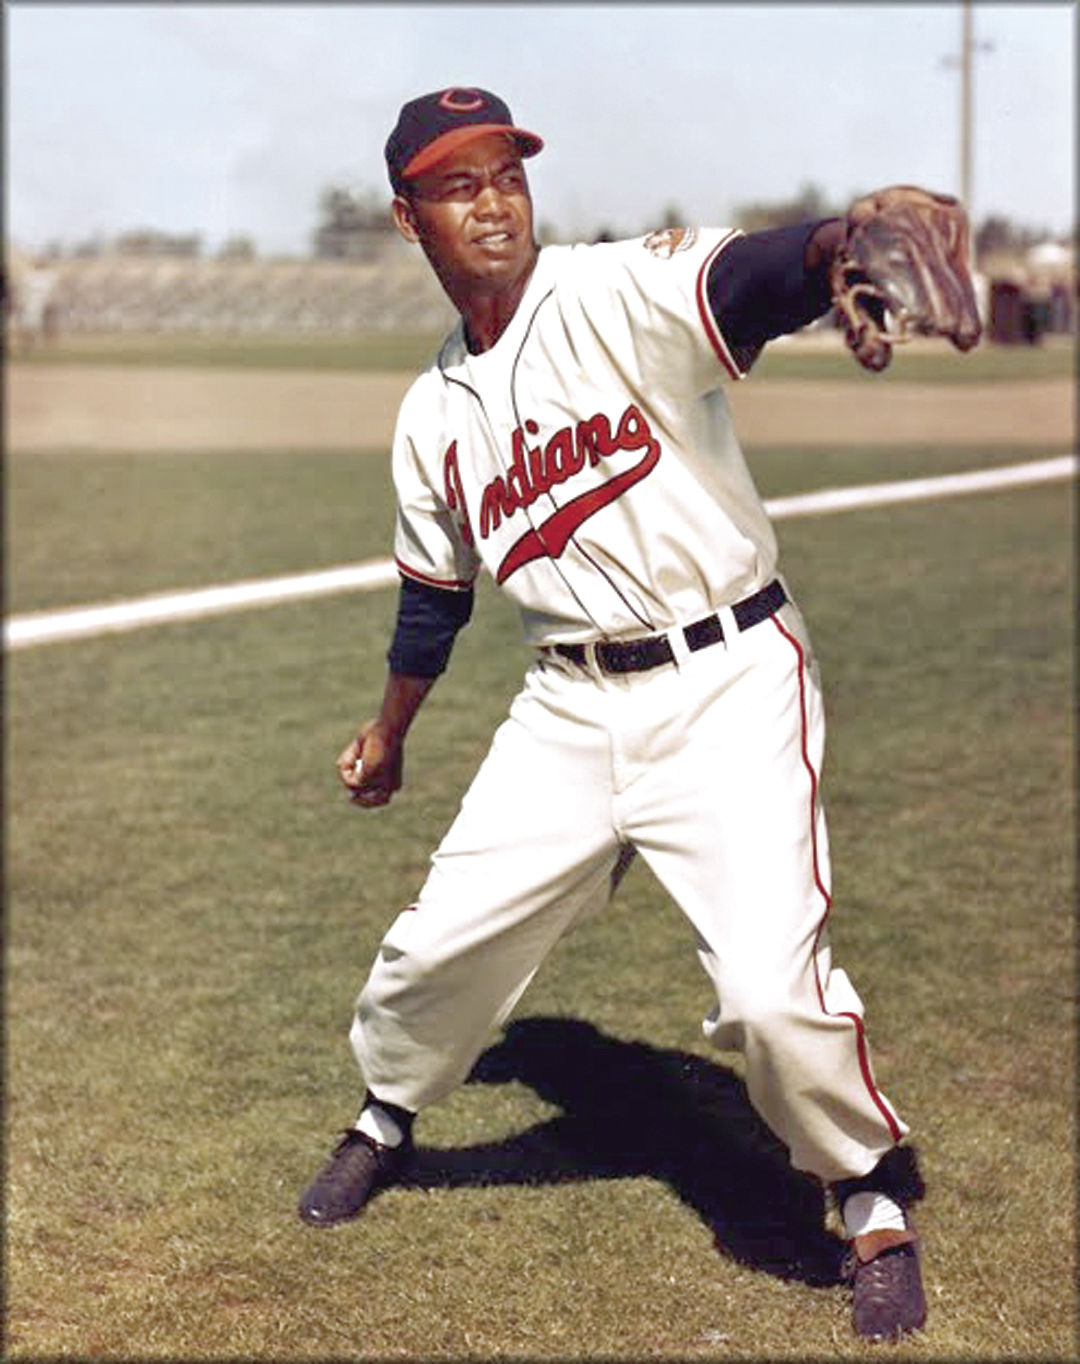 Larry Doby Congressional Gold Medal, CCAC Images